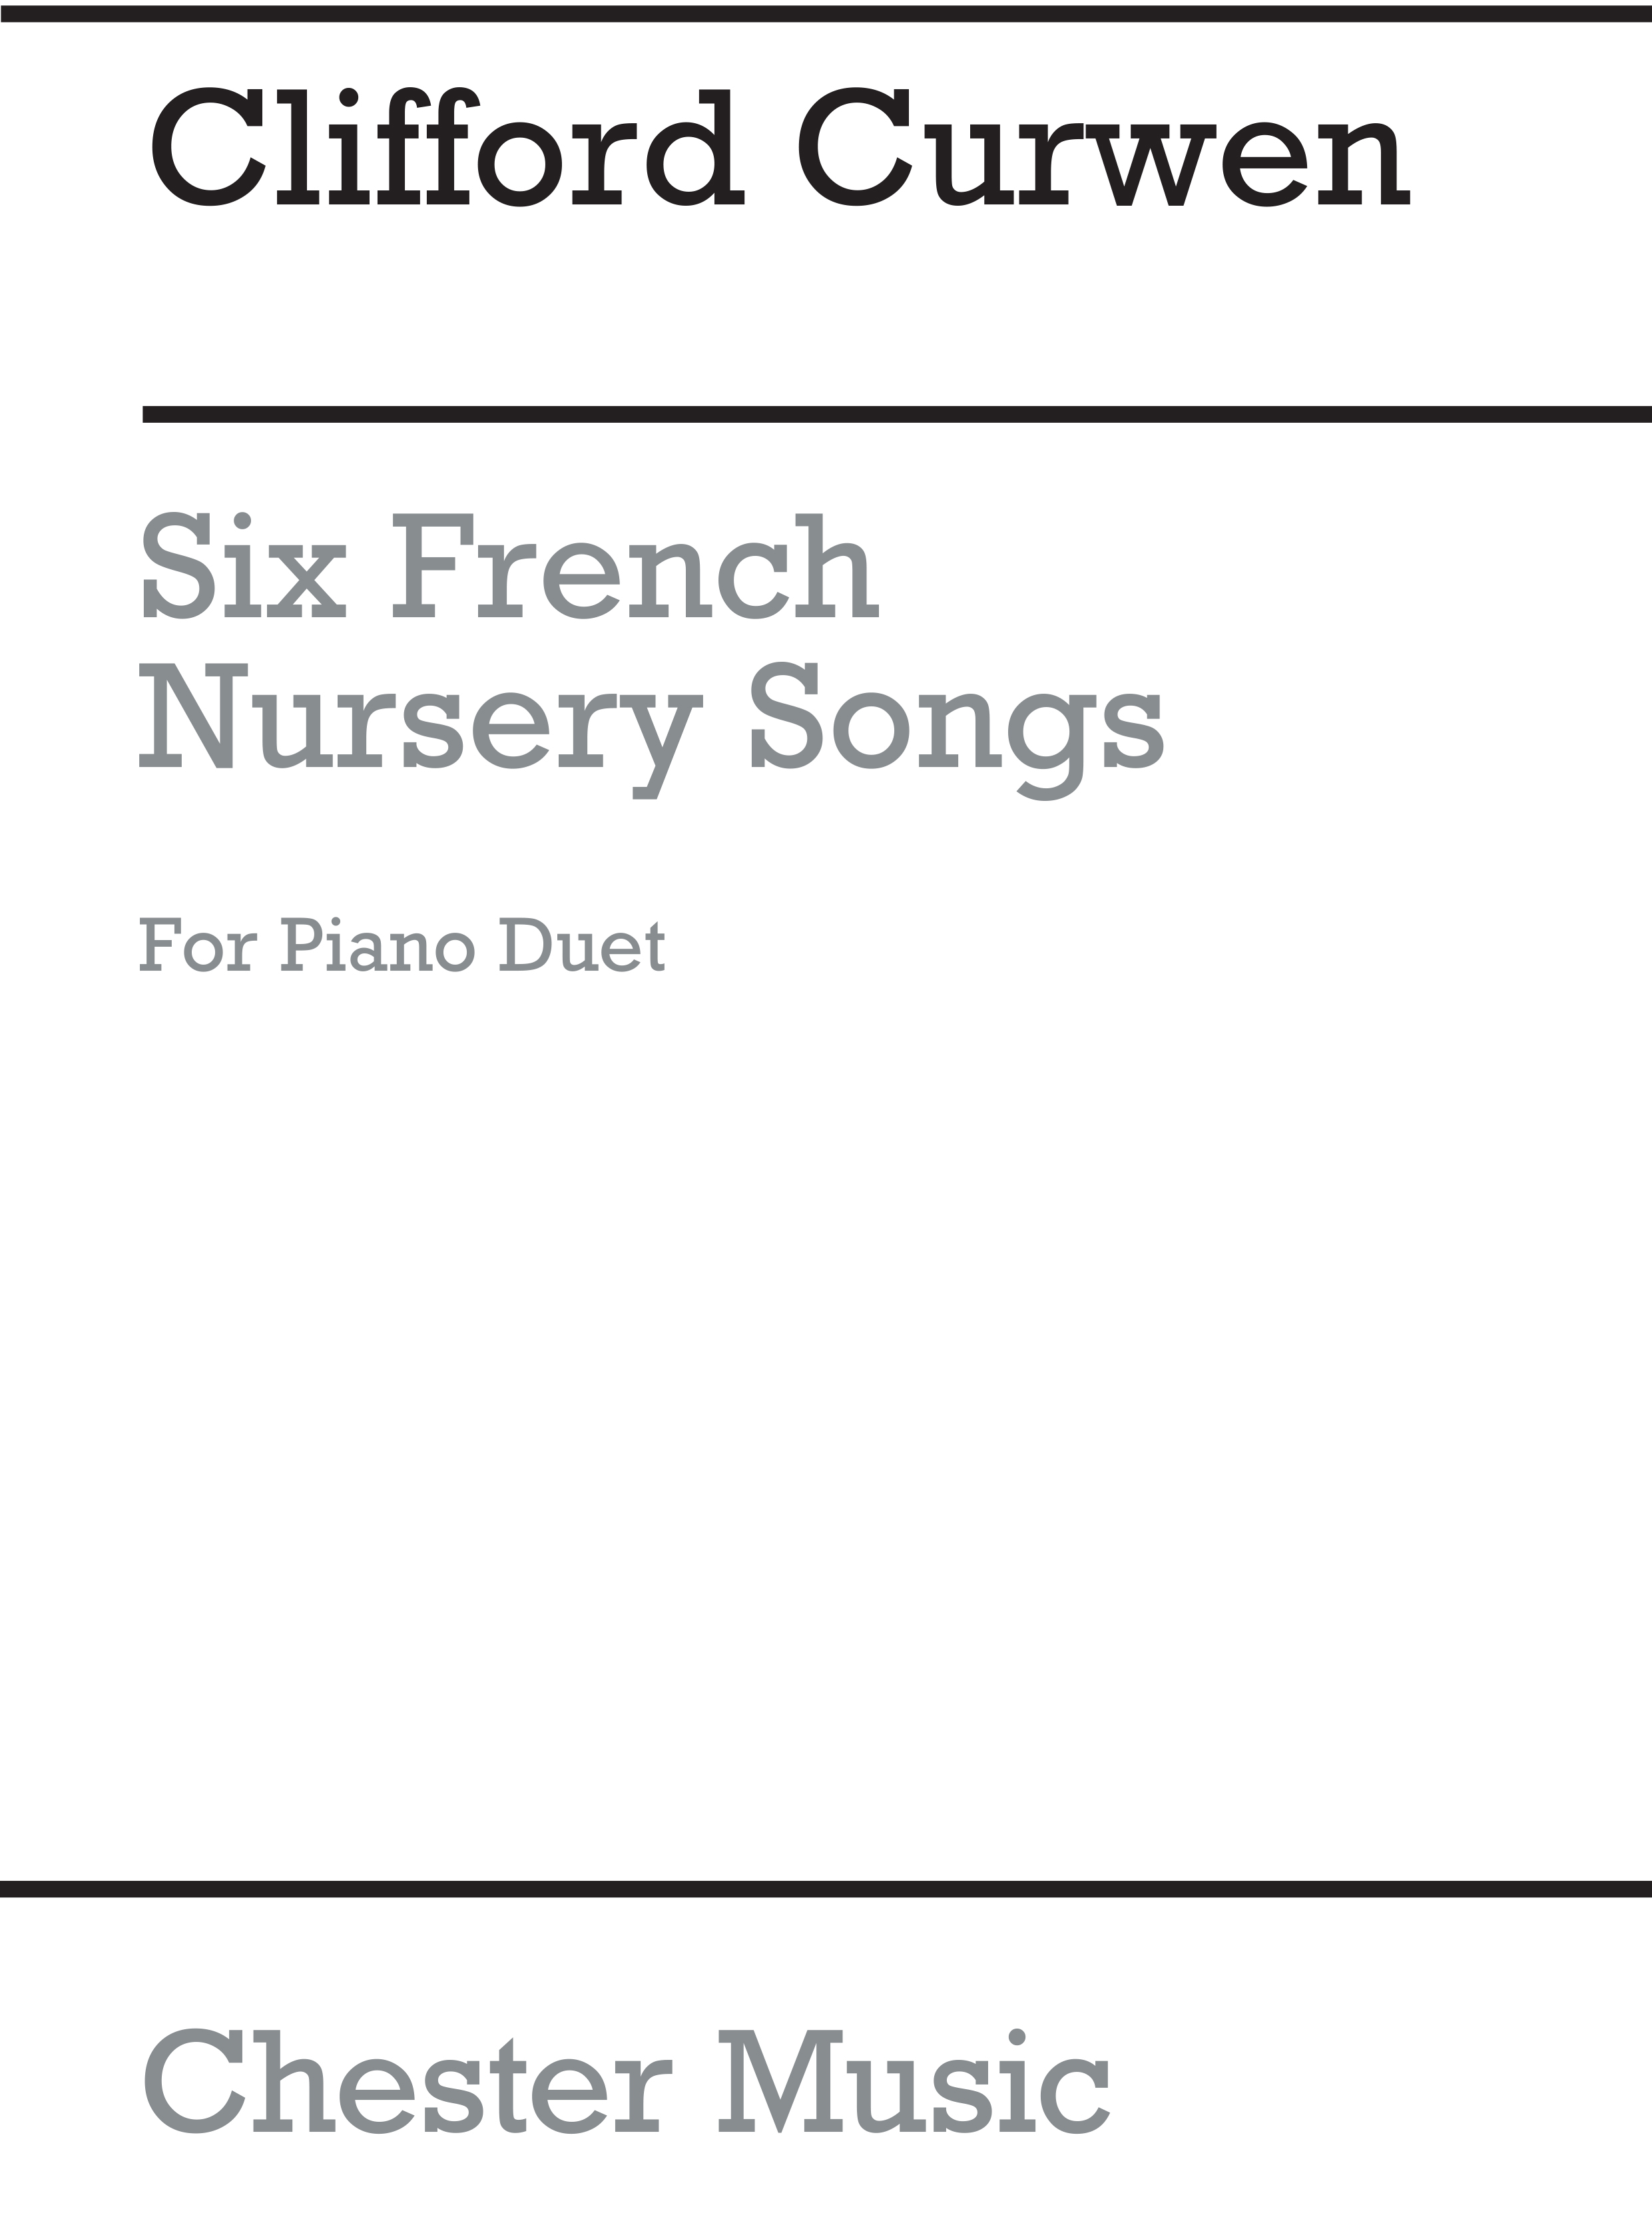 Clifford Curwin: 6 French Nursery Songs For Piano Duet: Piano Duet: Instrumental